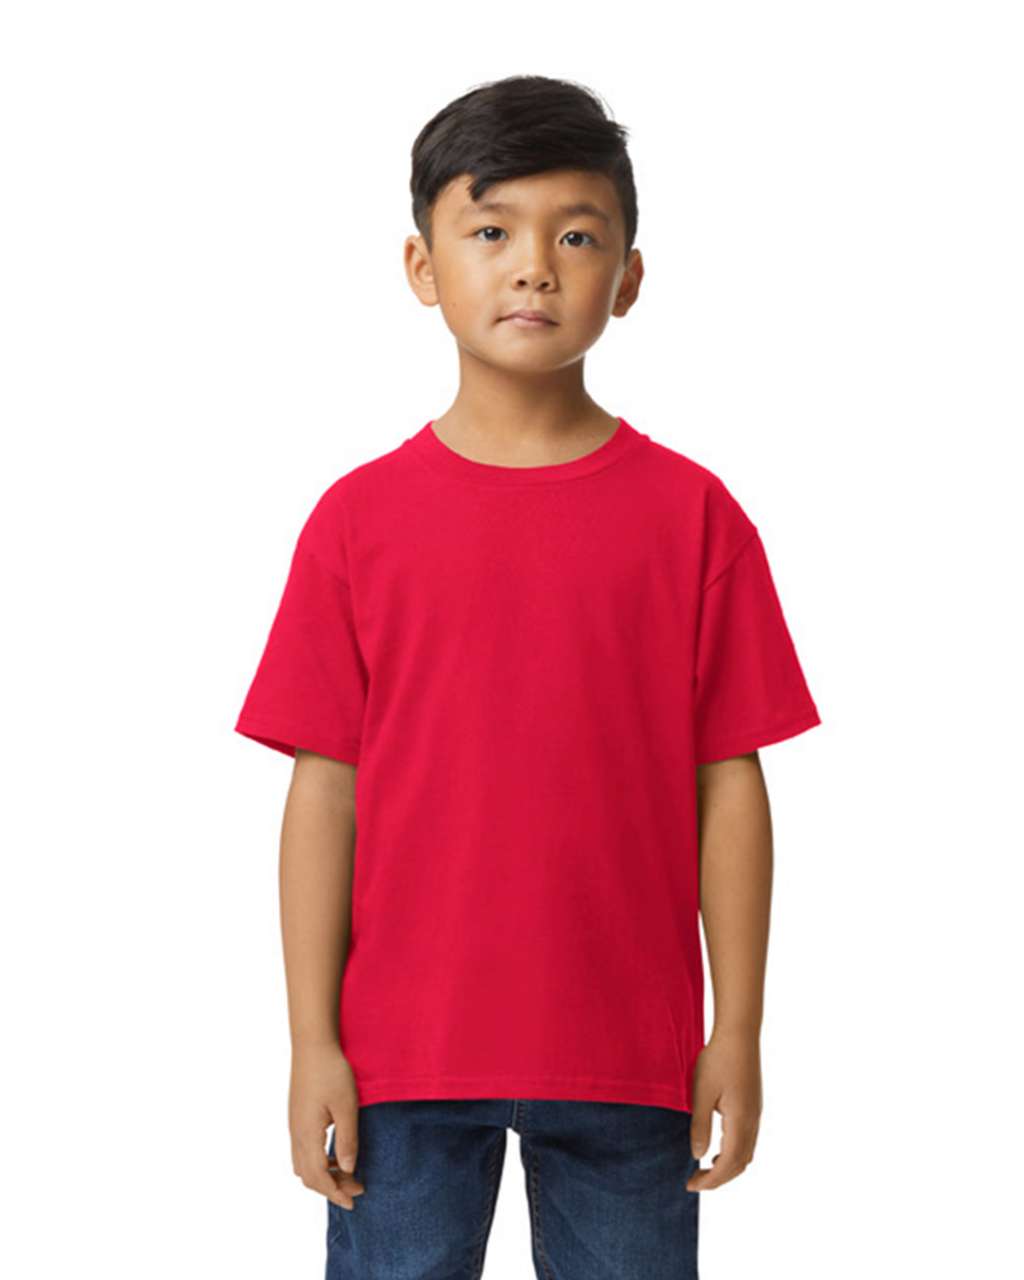 Gildan Softstyle® Midweight Youth T-shirt - red